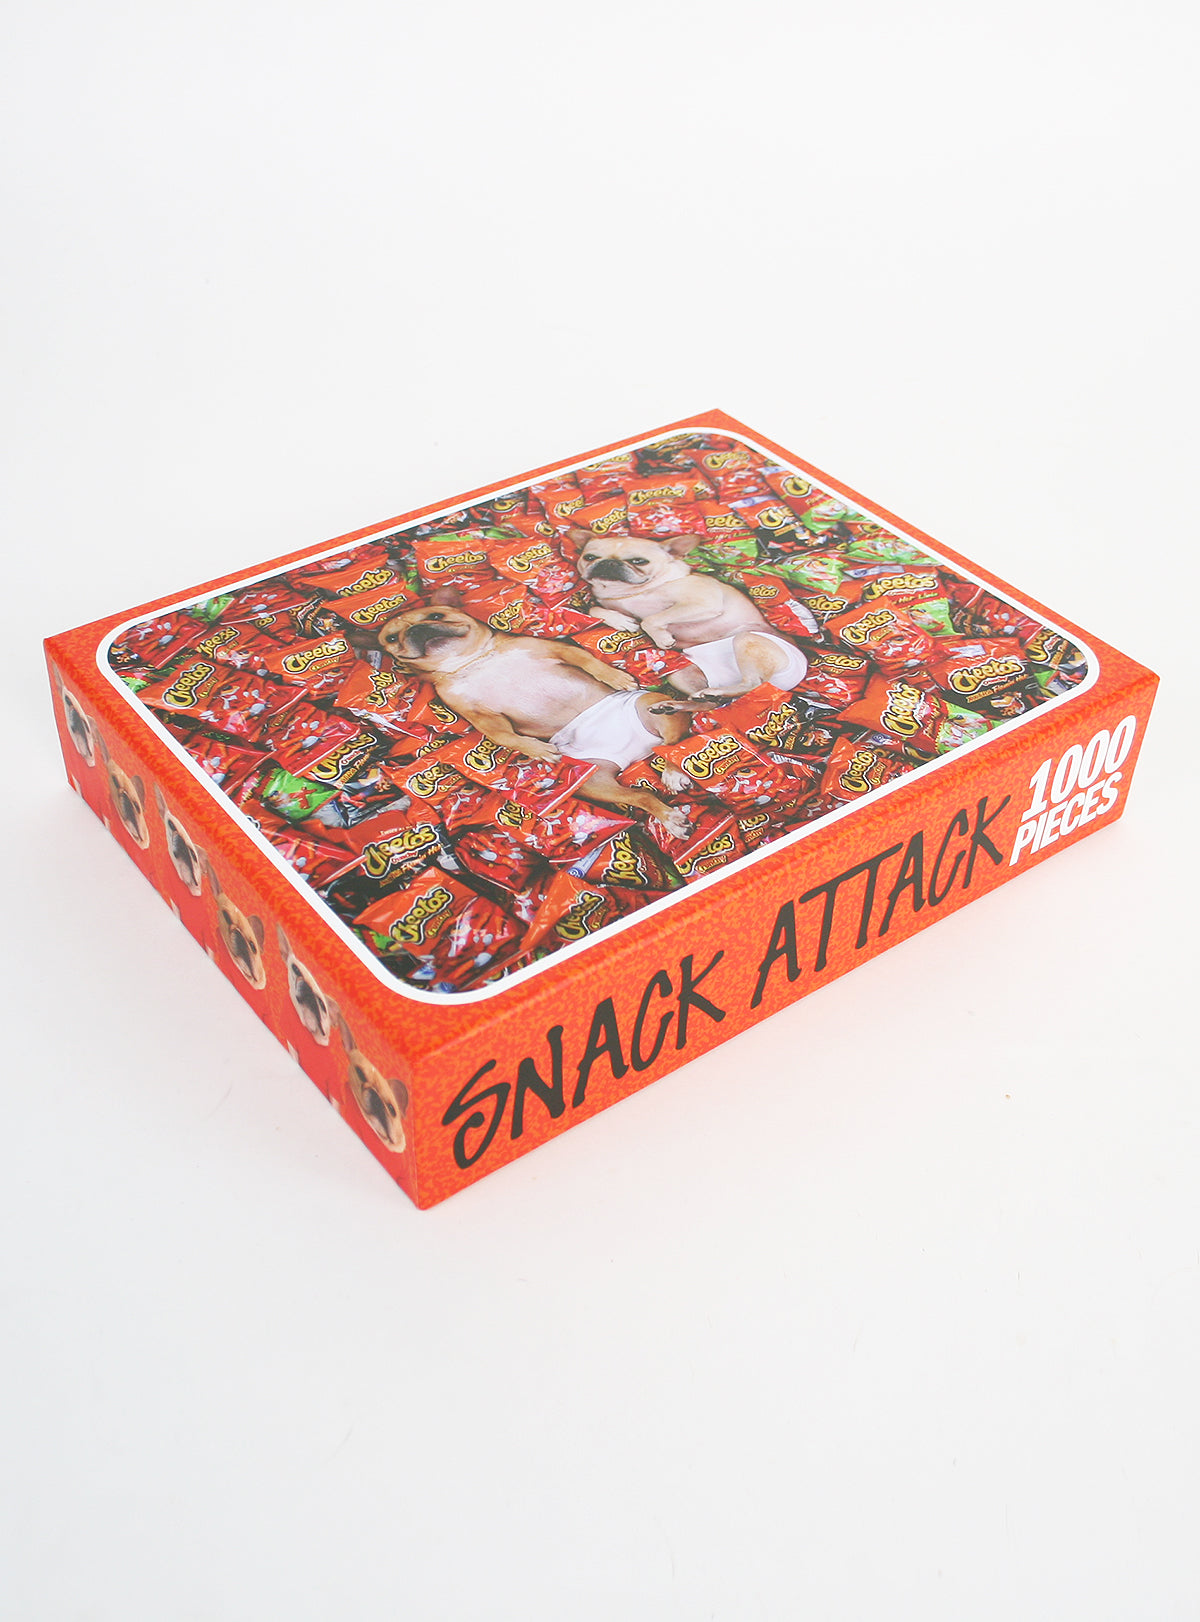 Snack Attack Jigsaw Puzzle